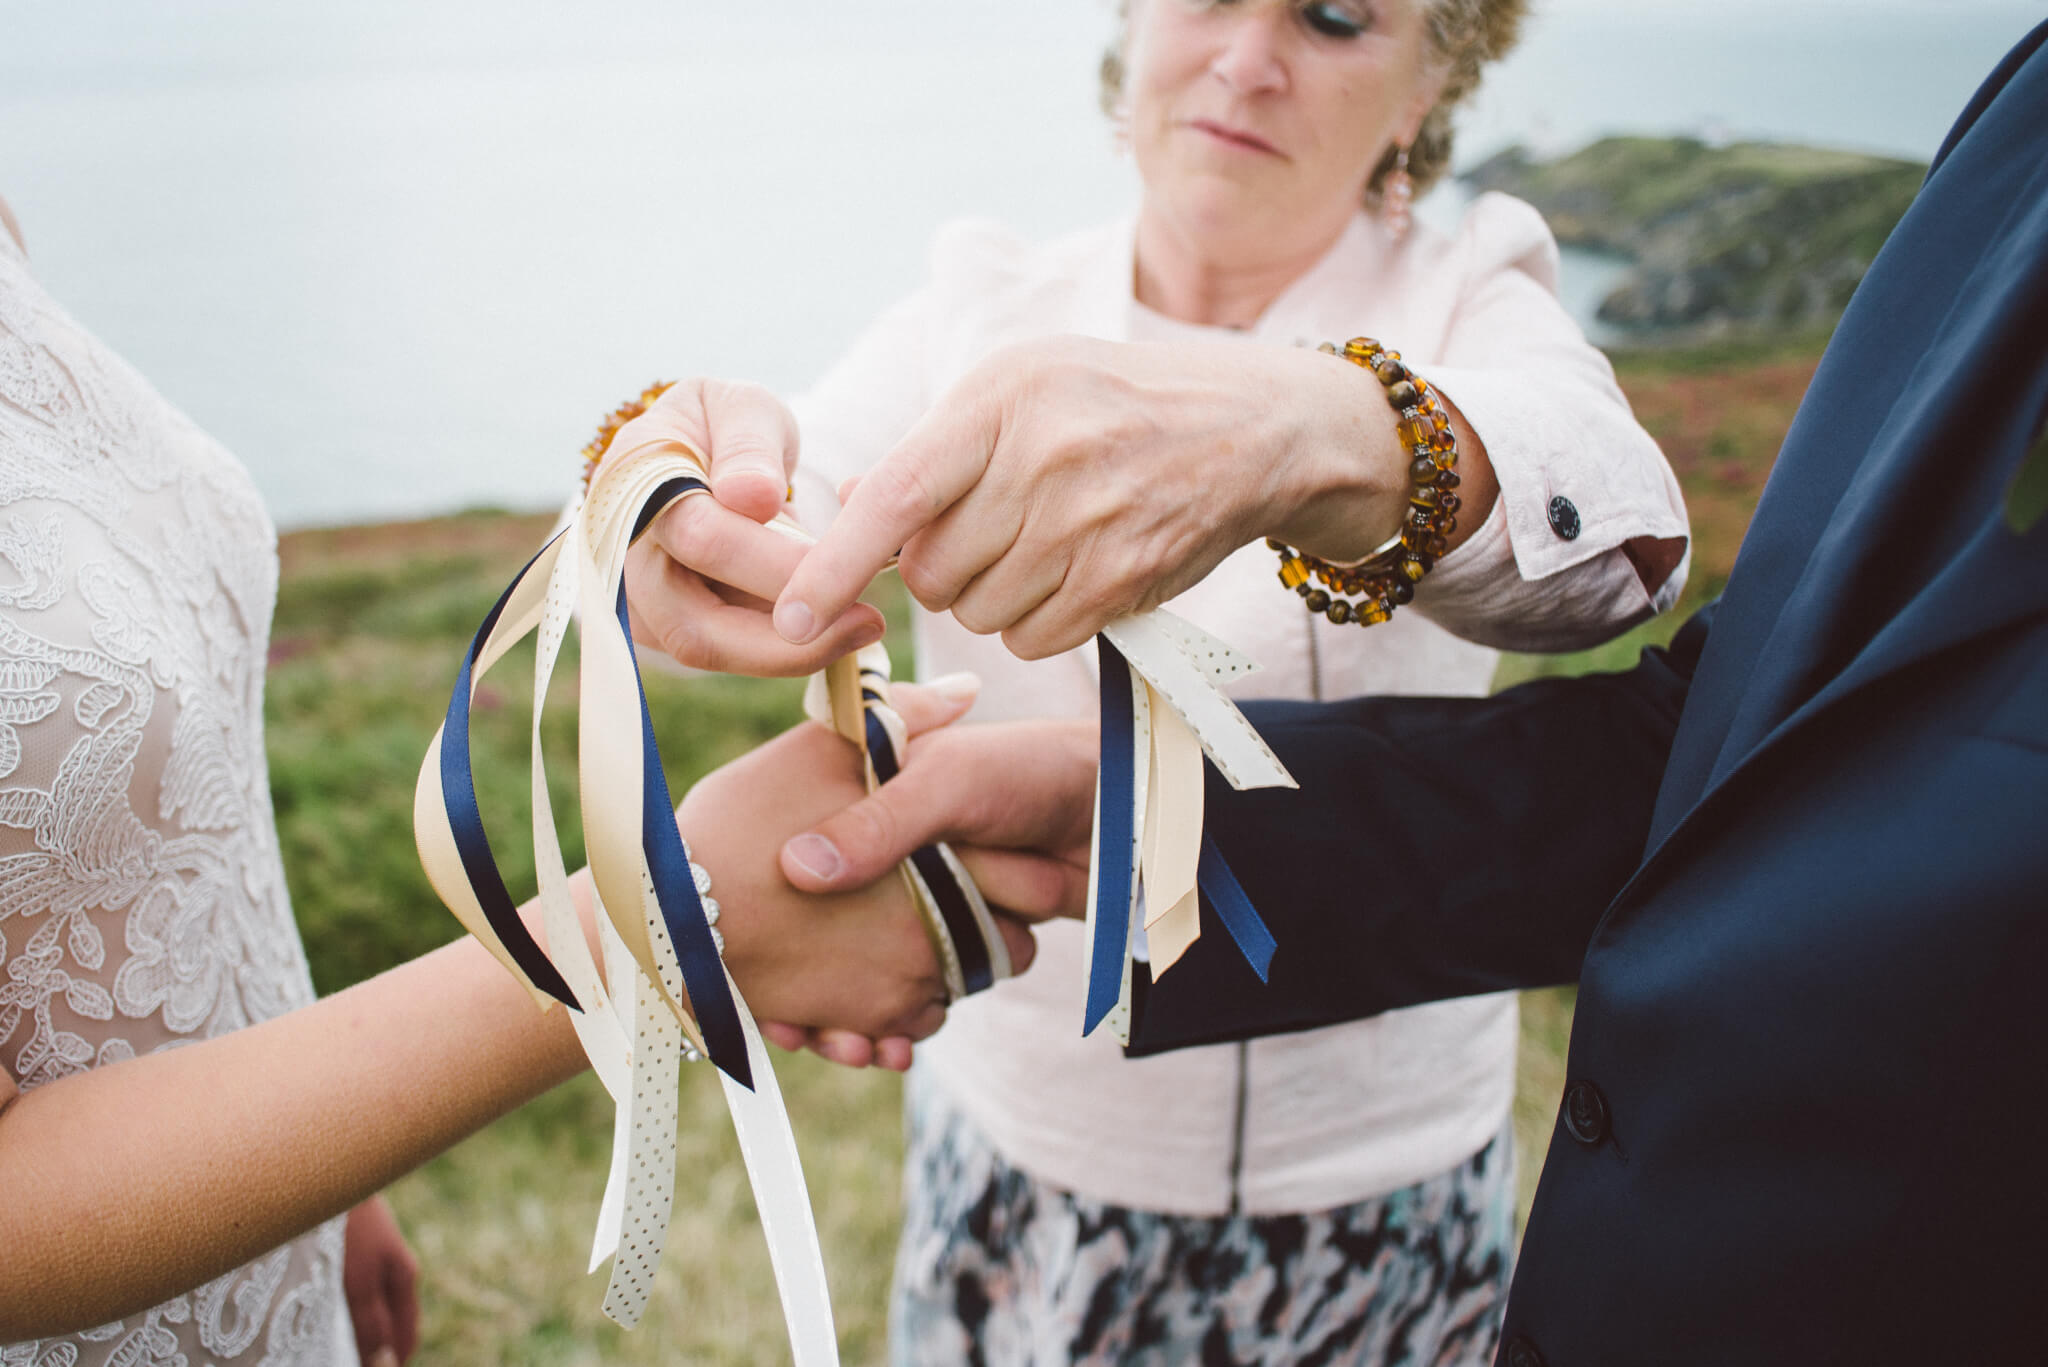 Some ideas for making your handfasting cord extra special 